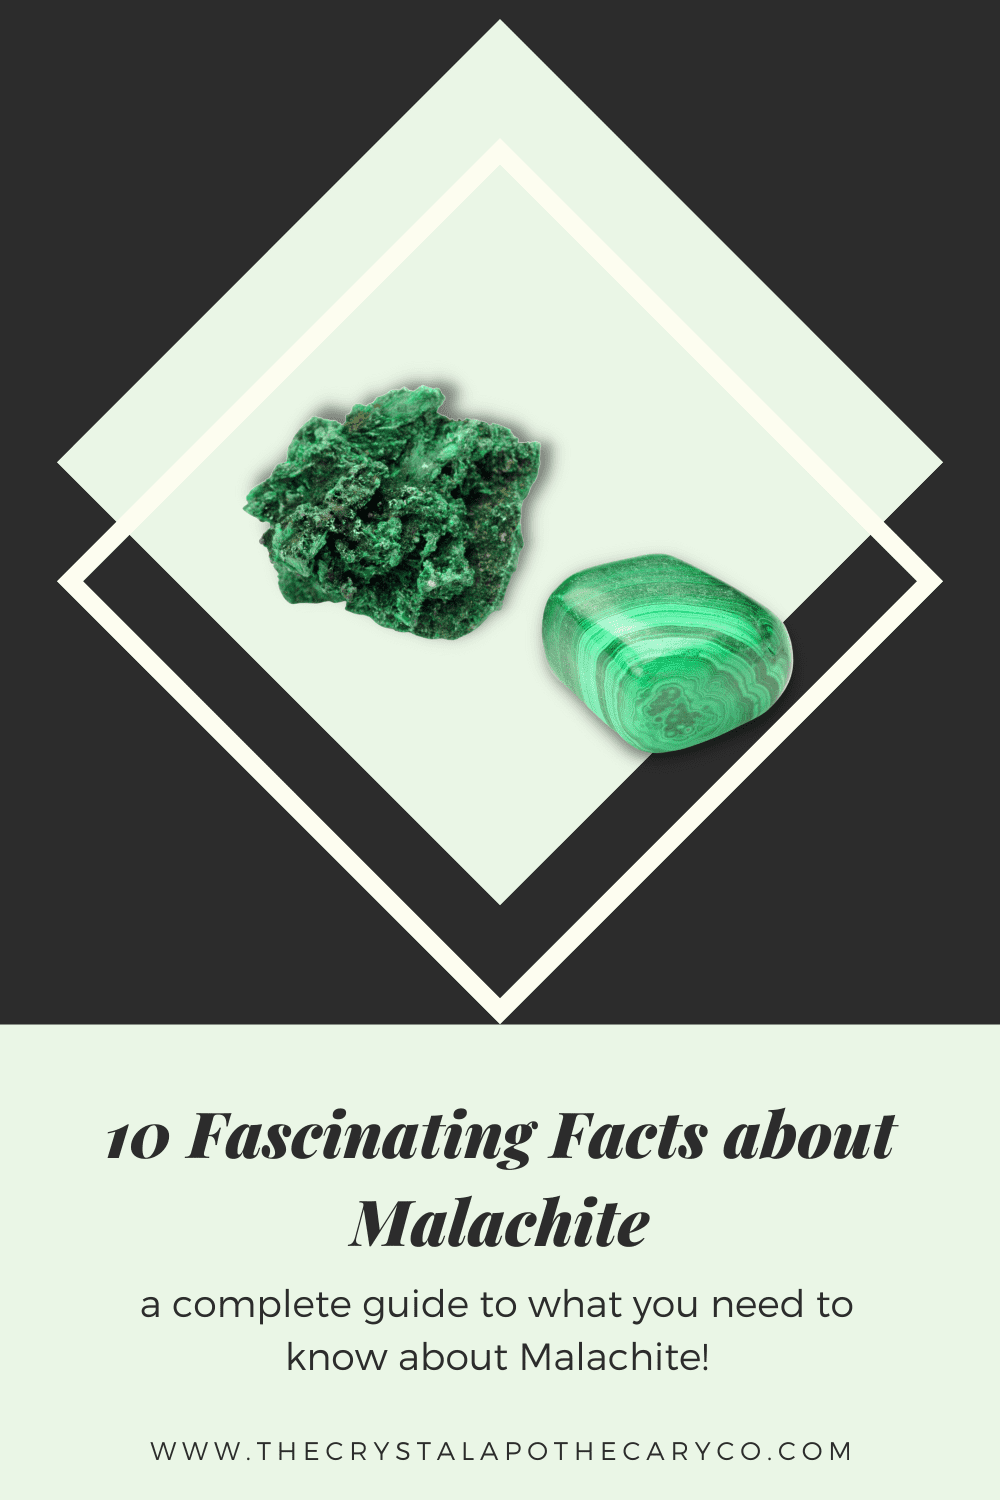 10 Fascinating Facts about Malachite That You Need to Know